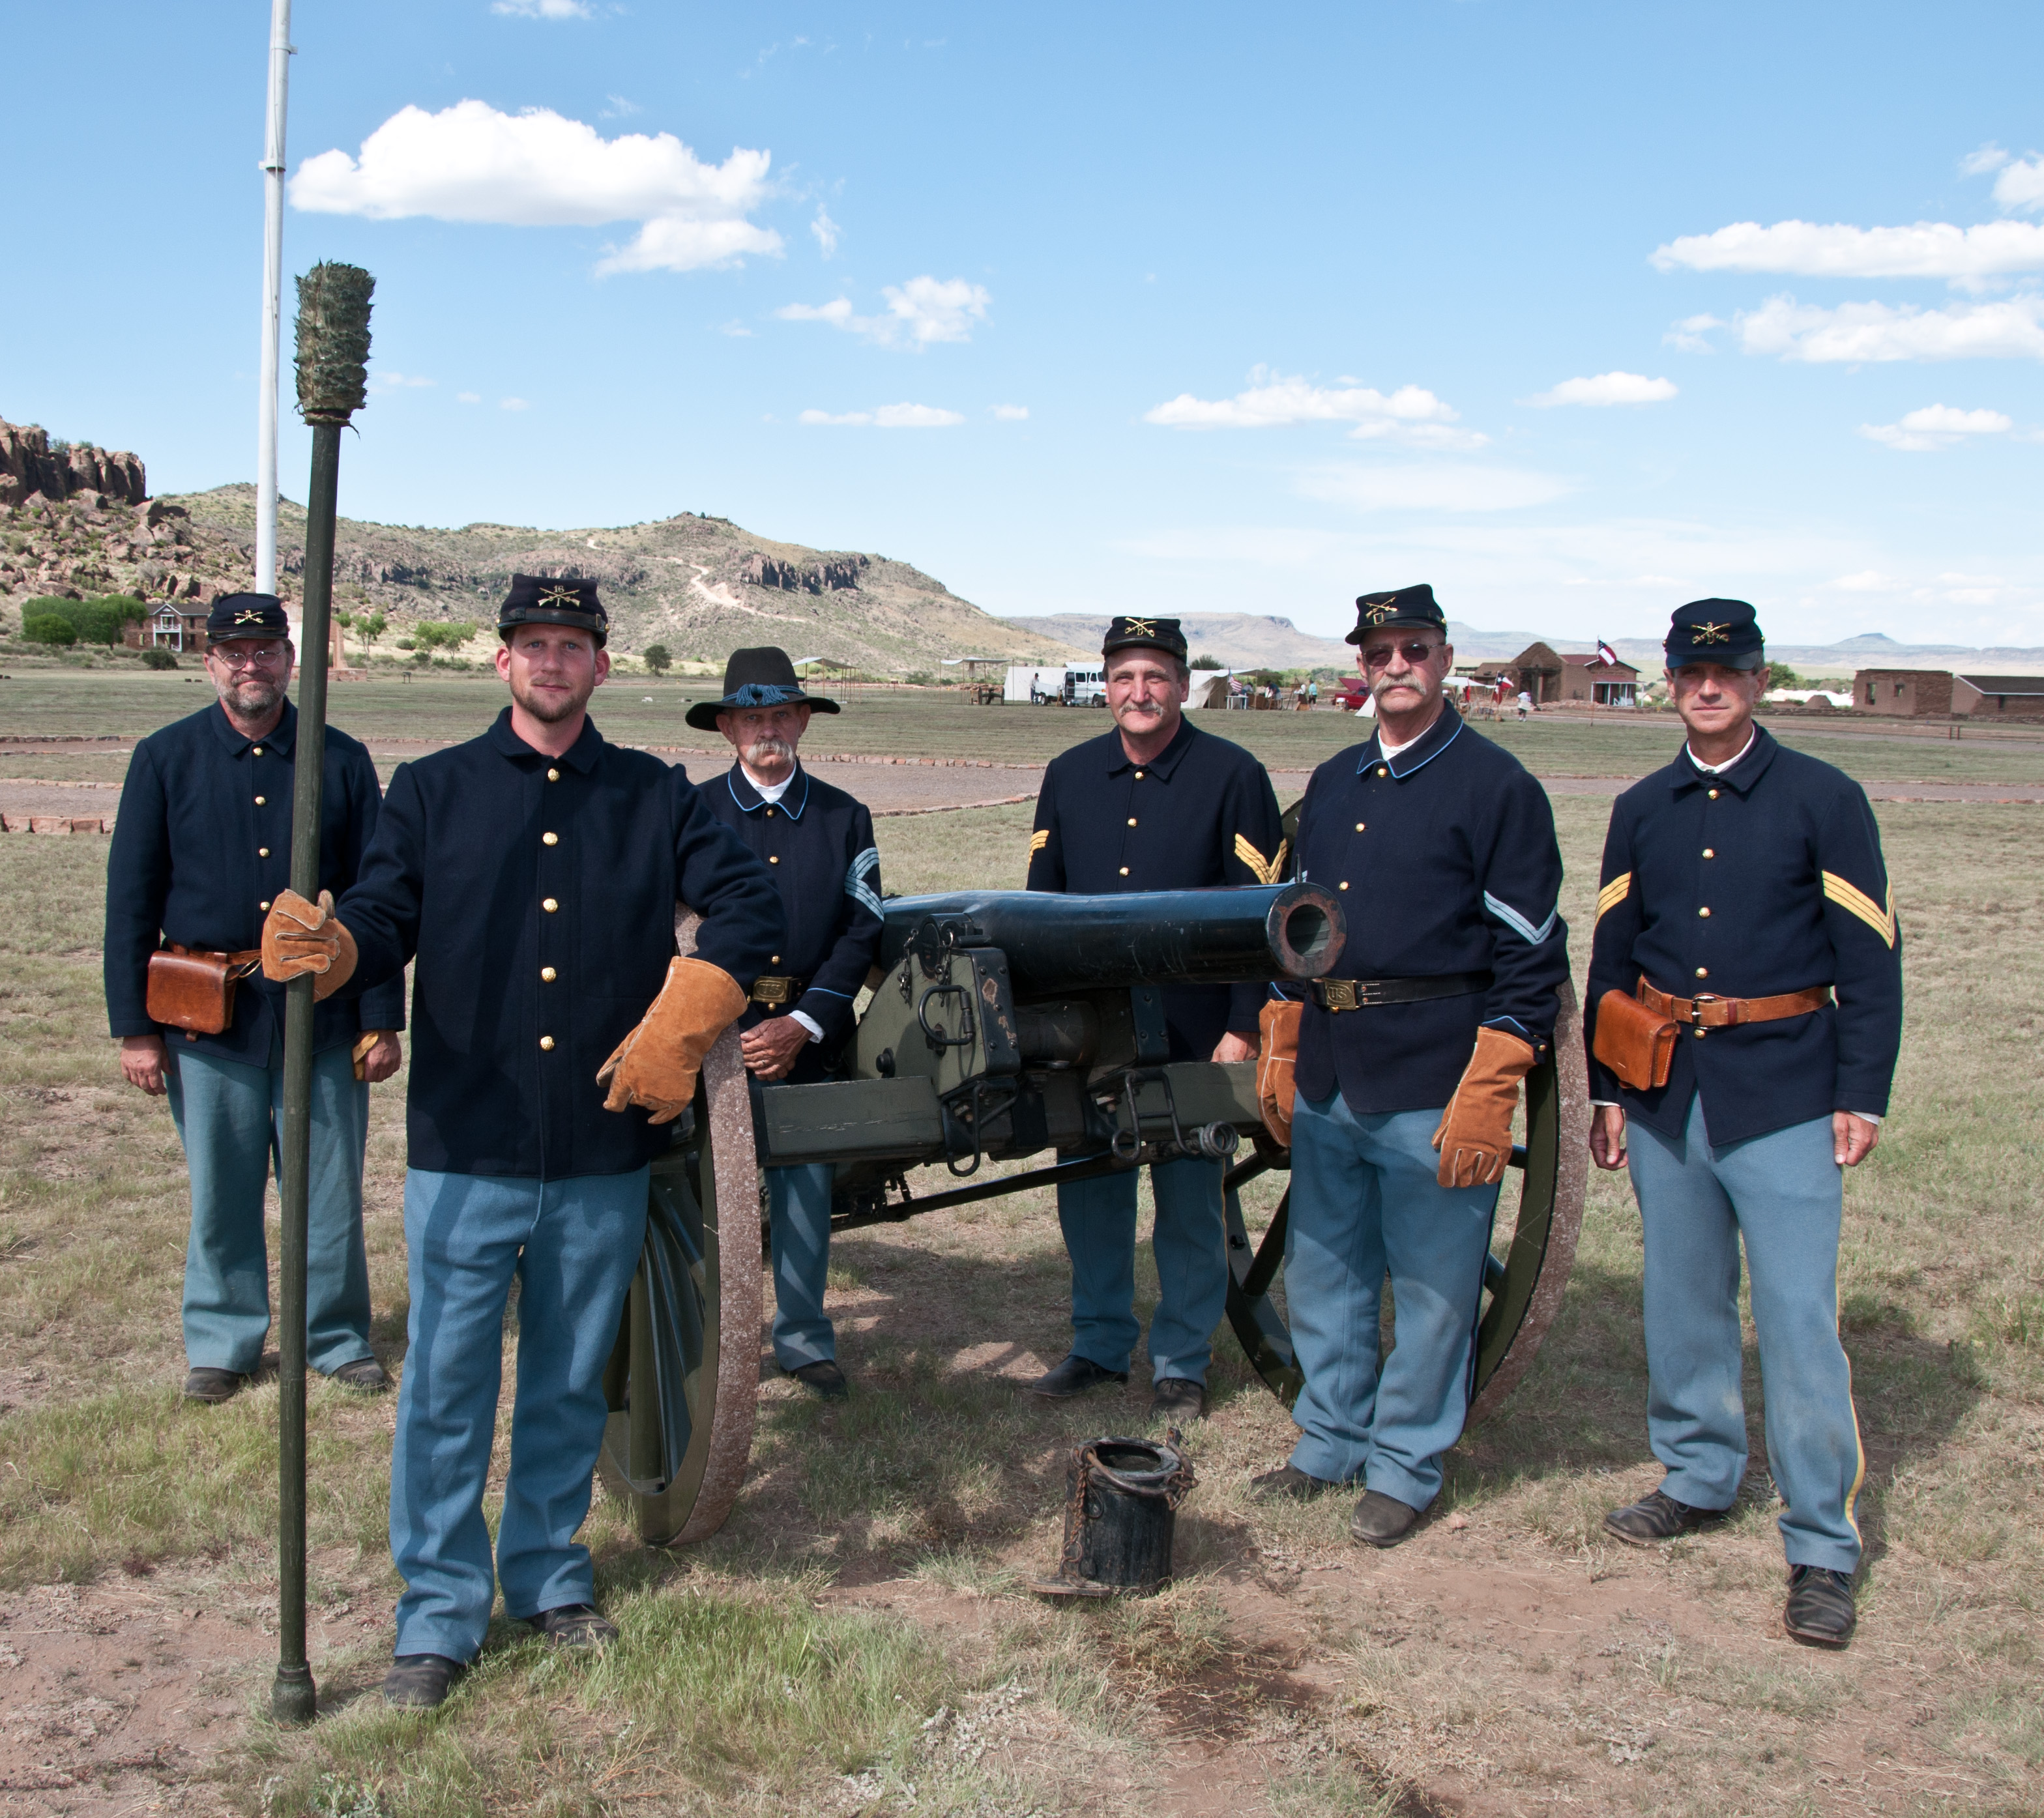 Artillery Crew stands at the ready